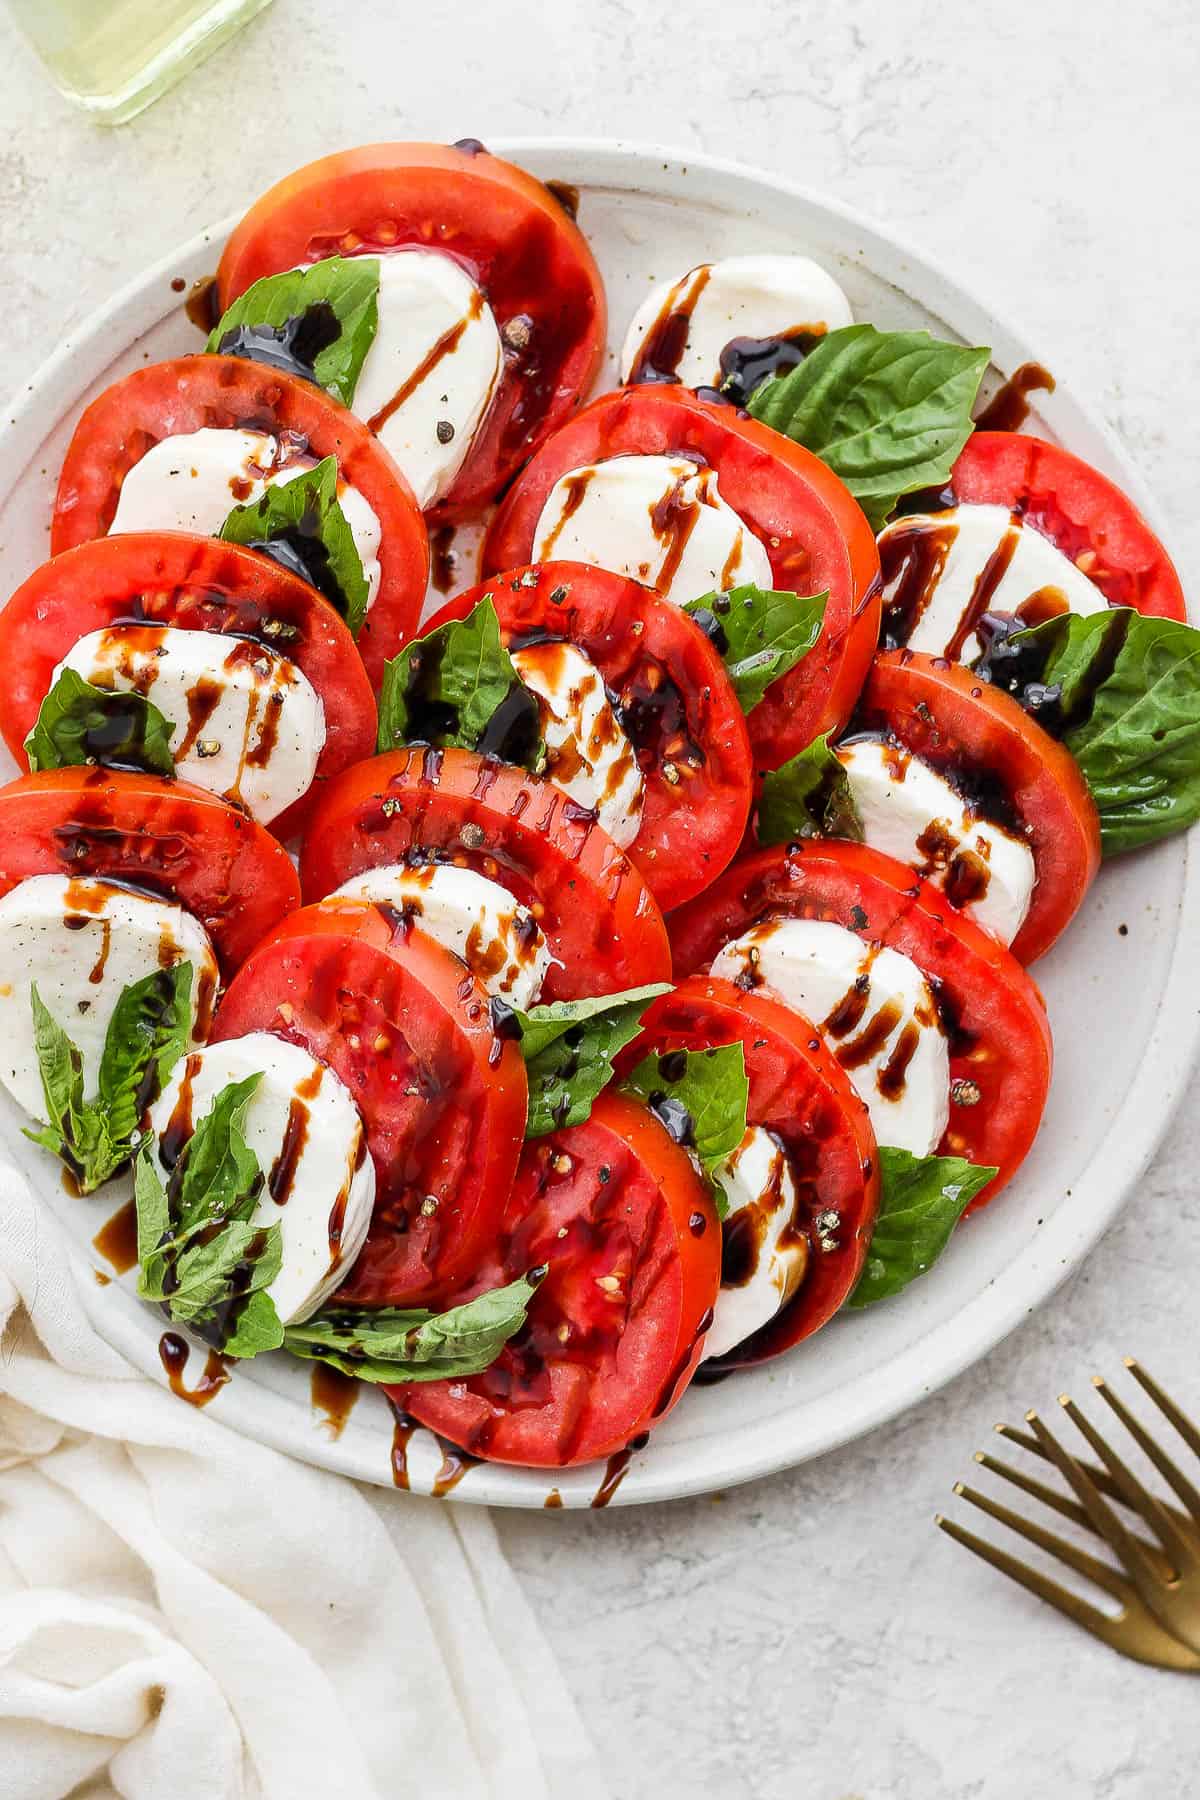 Olive oil and balsamic vinegar drizzled on top of the tomatoes, cheese, and basil.